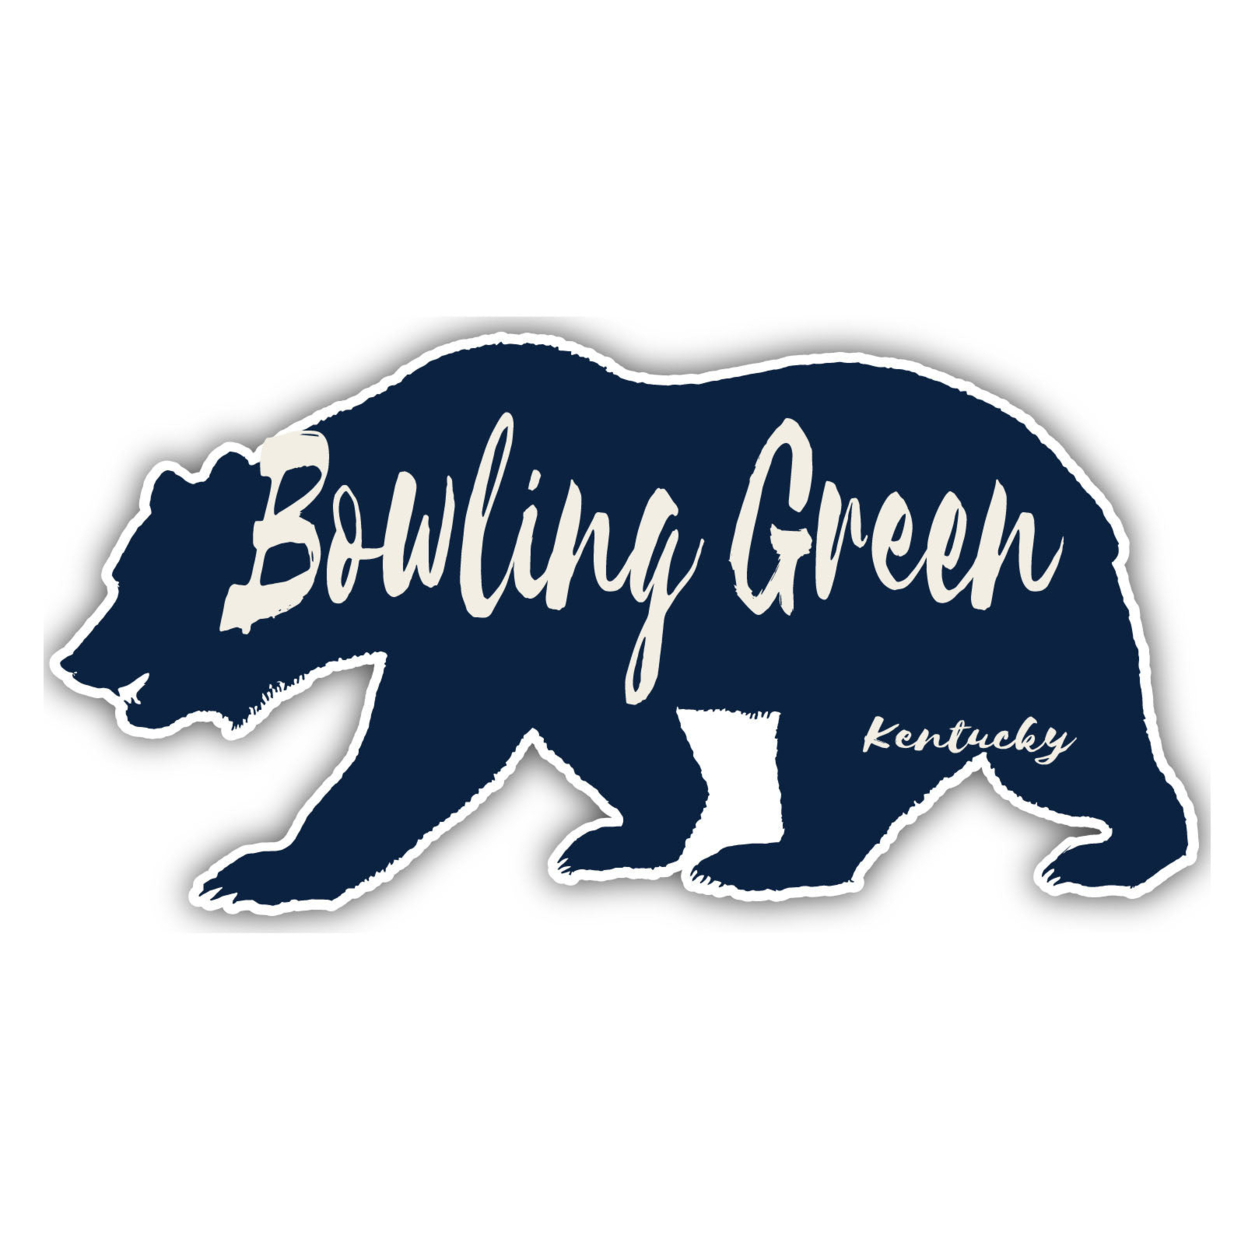 Bowling Green Kentucky Souvenir Decorative Stickers (Choose Theme And Size) - Single Unit, 4-Inch, Tent